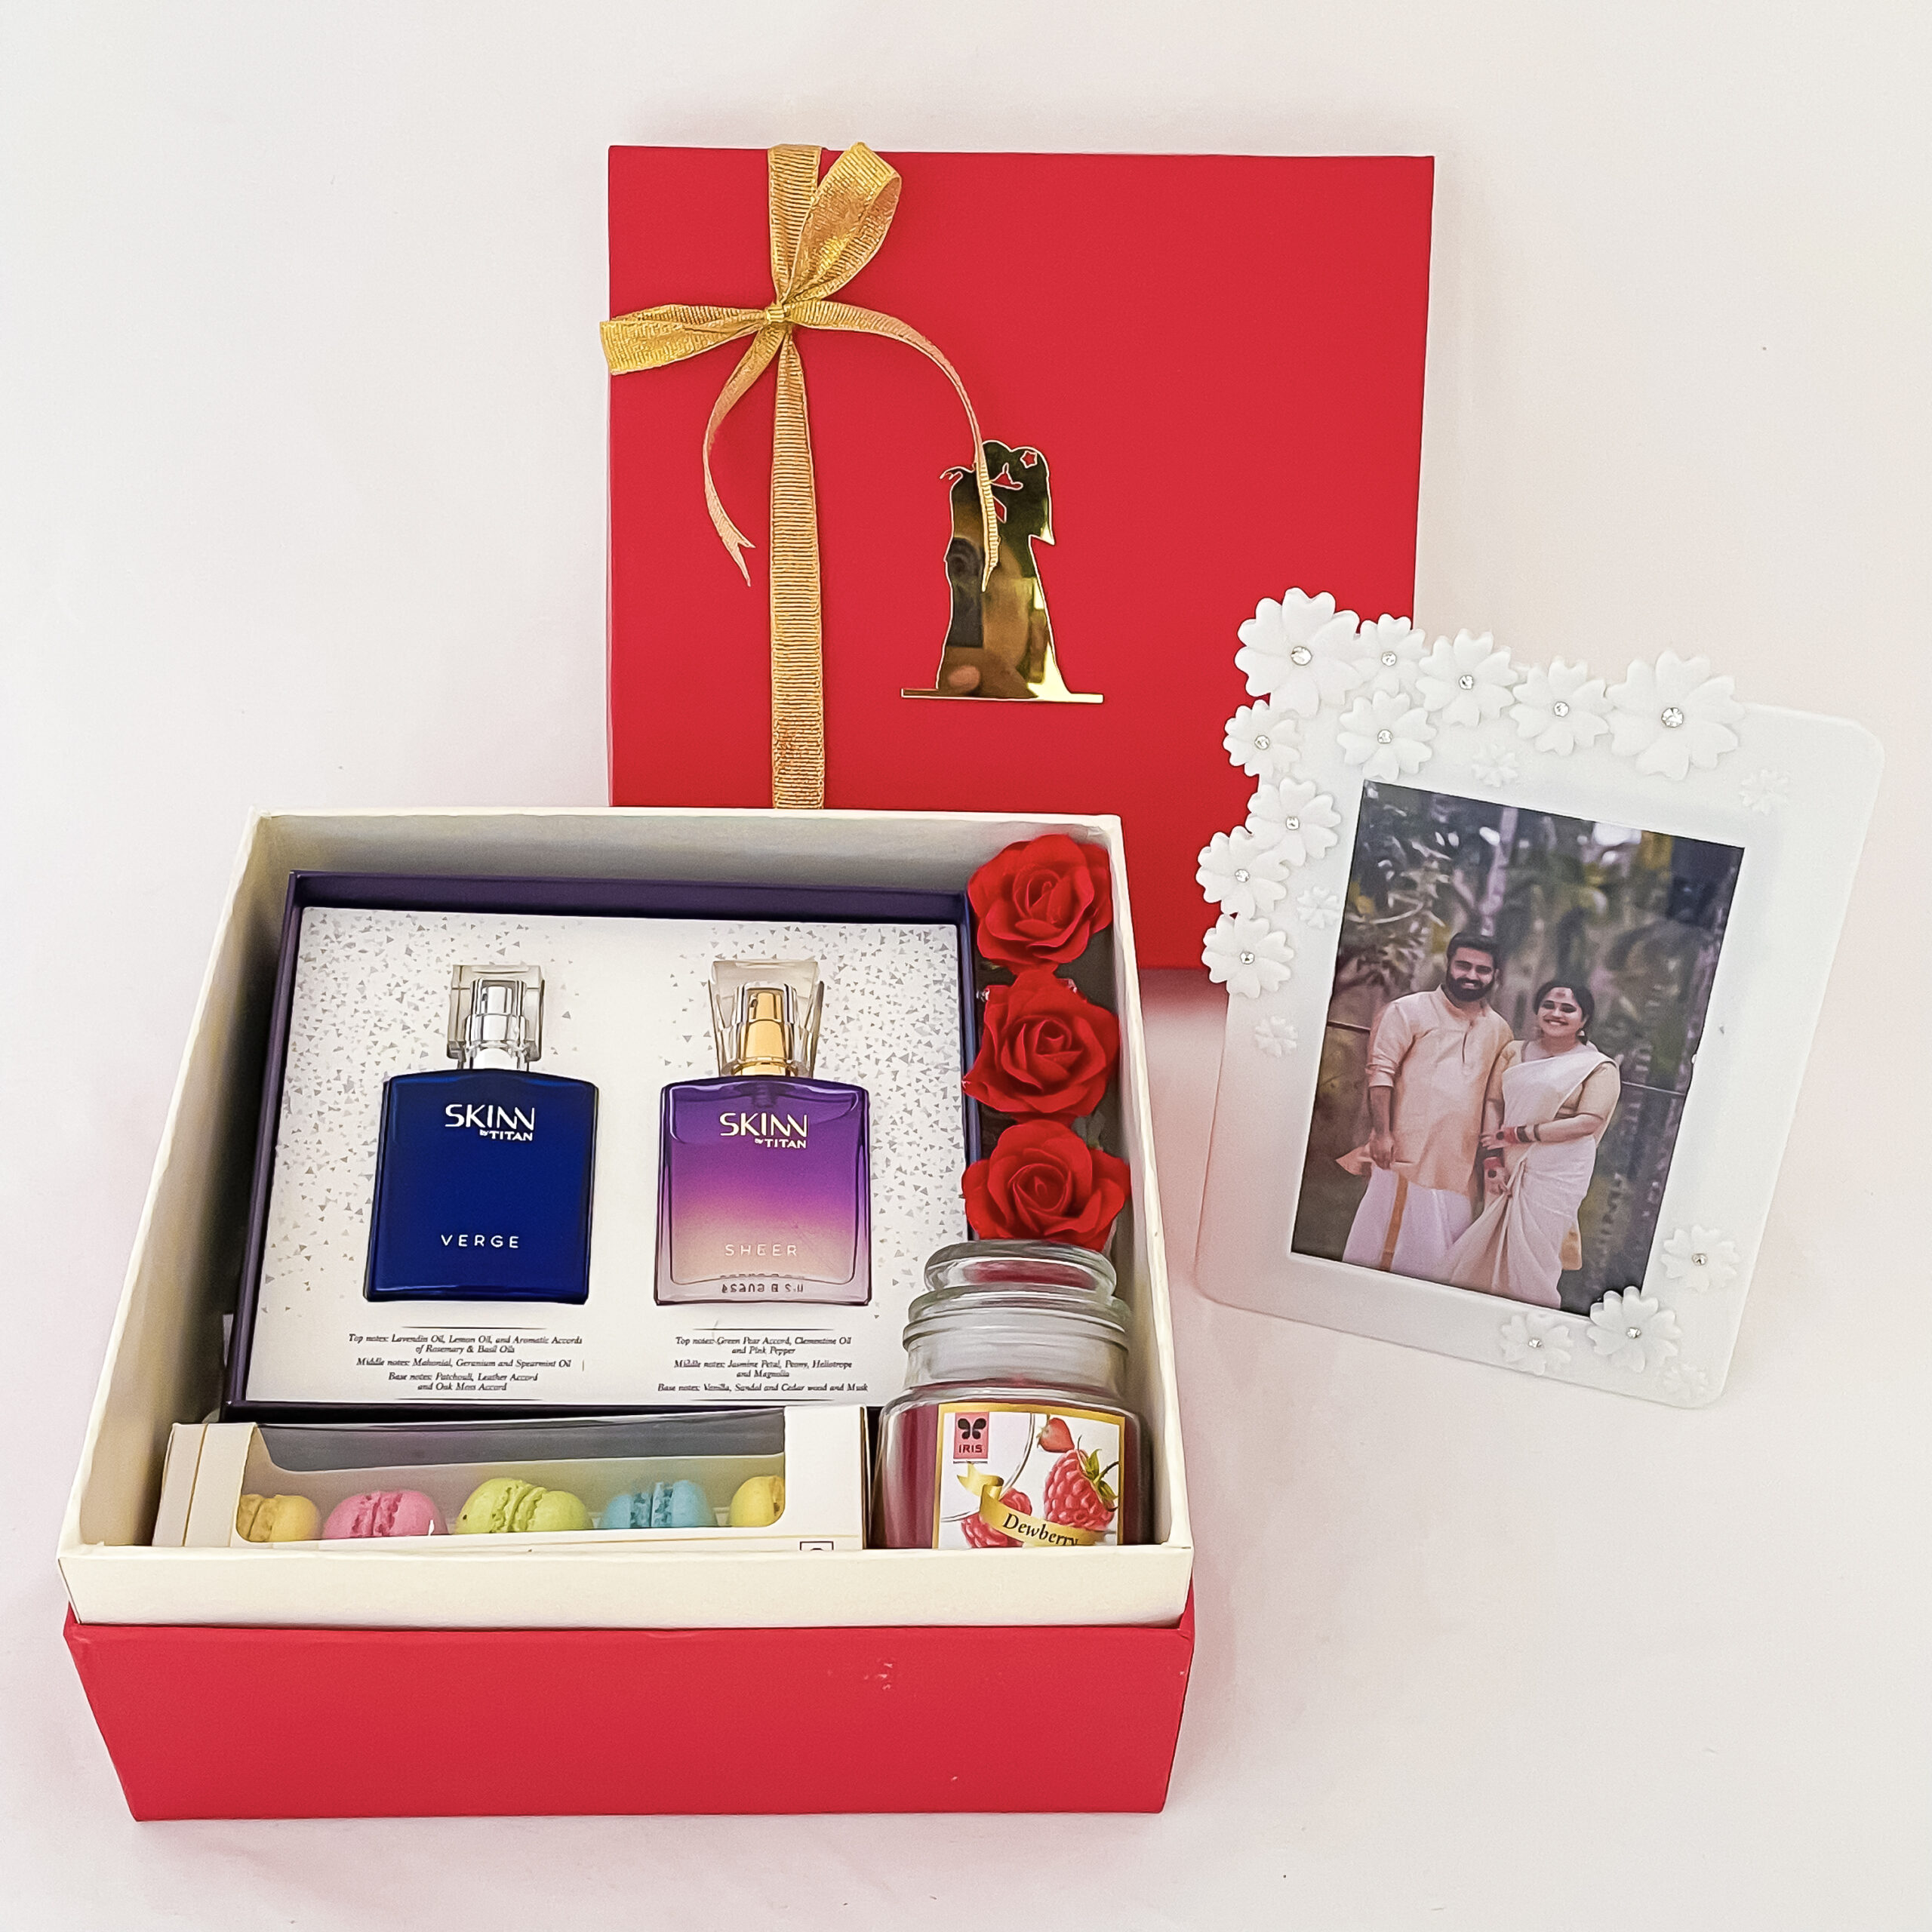 33 Romantic 6-Month Anniversary Gifts For Her » Make It A Special Gift-pokeht.vn